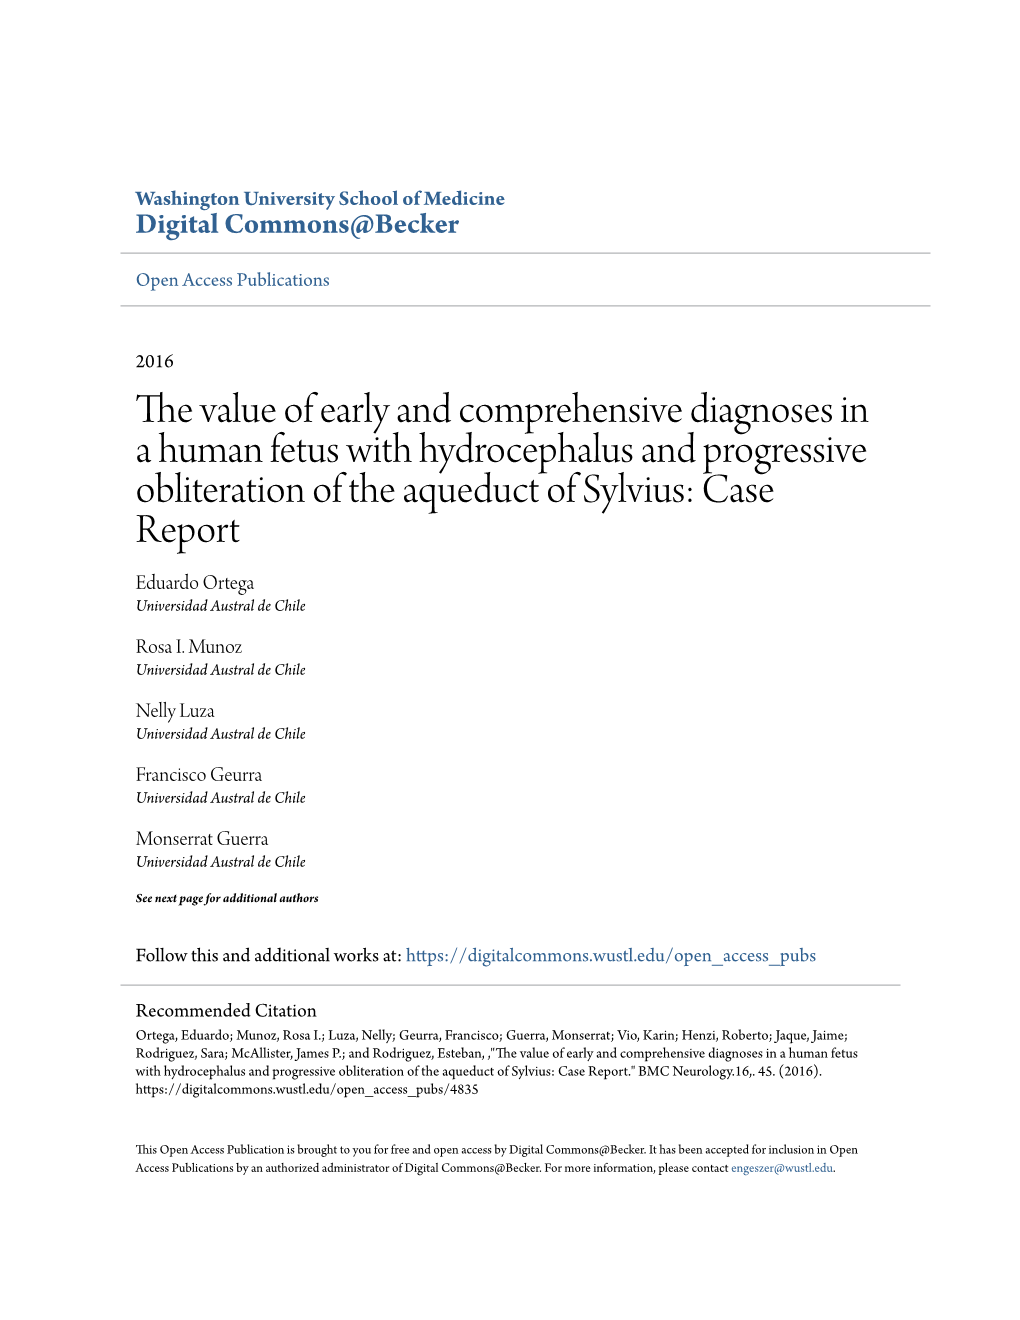 The Value of Early and Comprehensive Diagnoses in a Human Fetus With